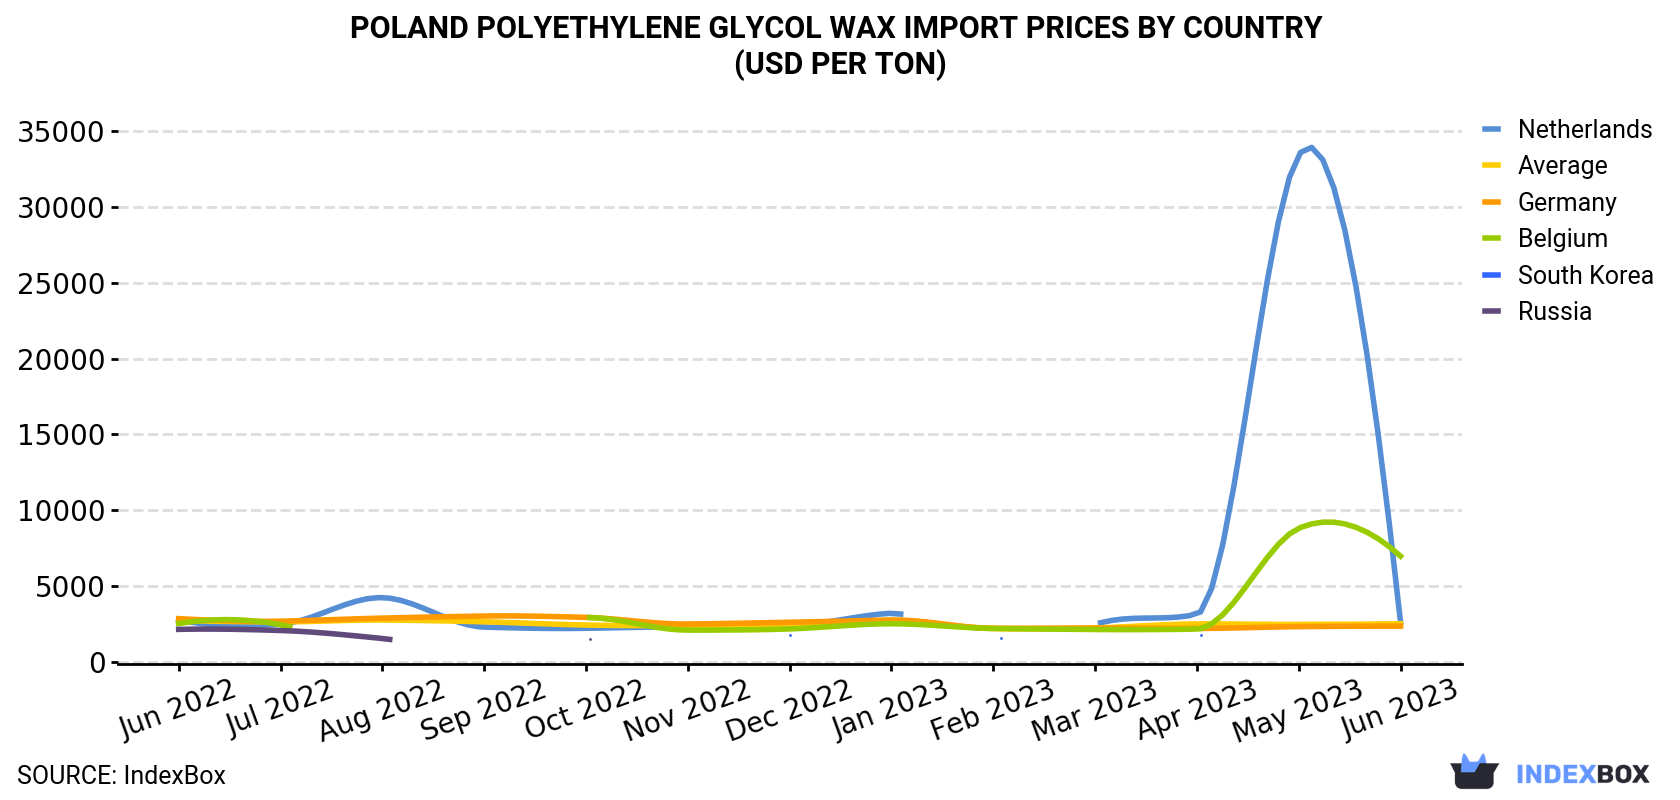 Poland Polyethylene Glycol Wax Import Prices By Country (USD Per Ton)